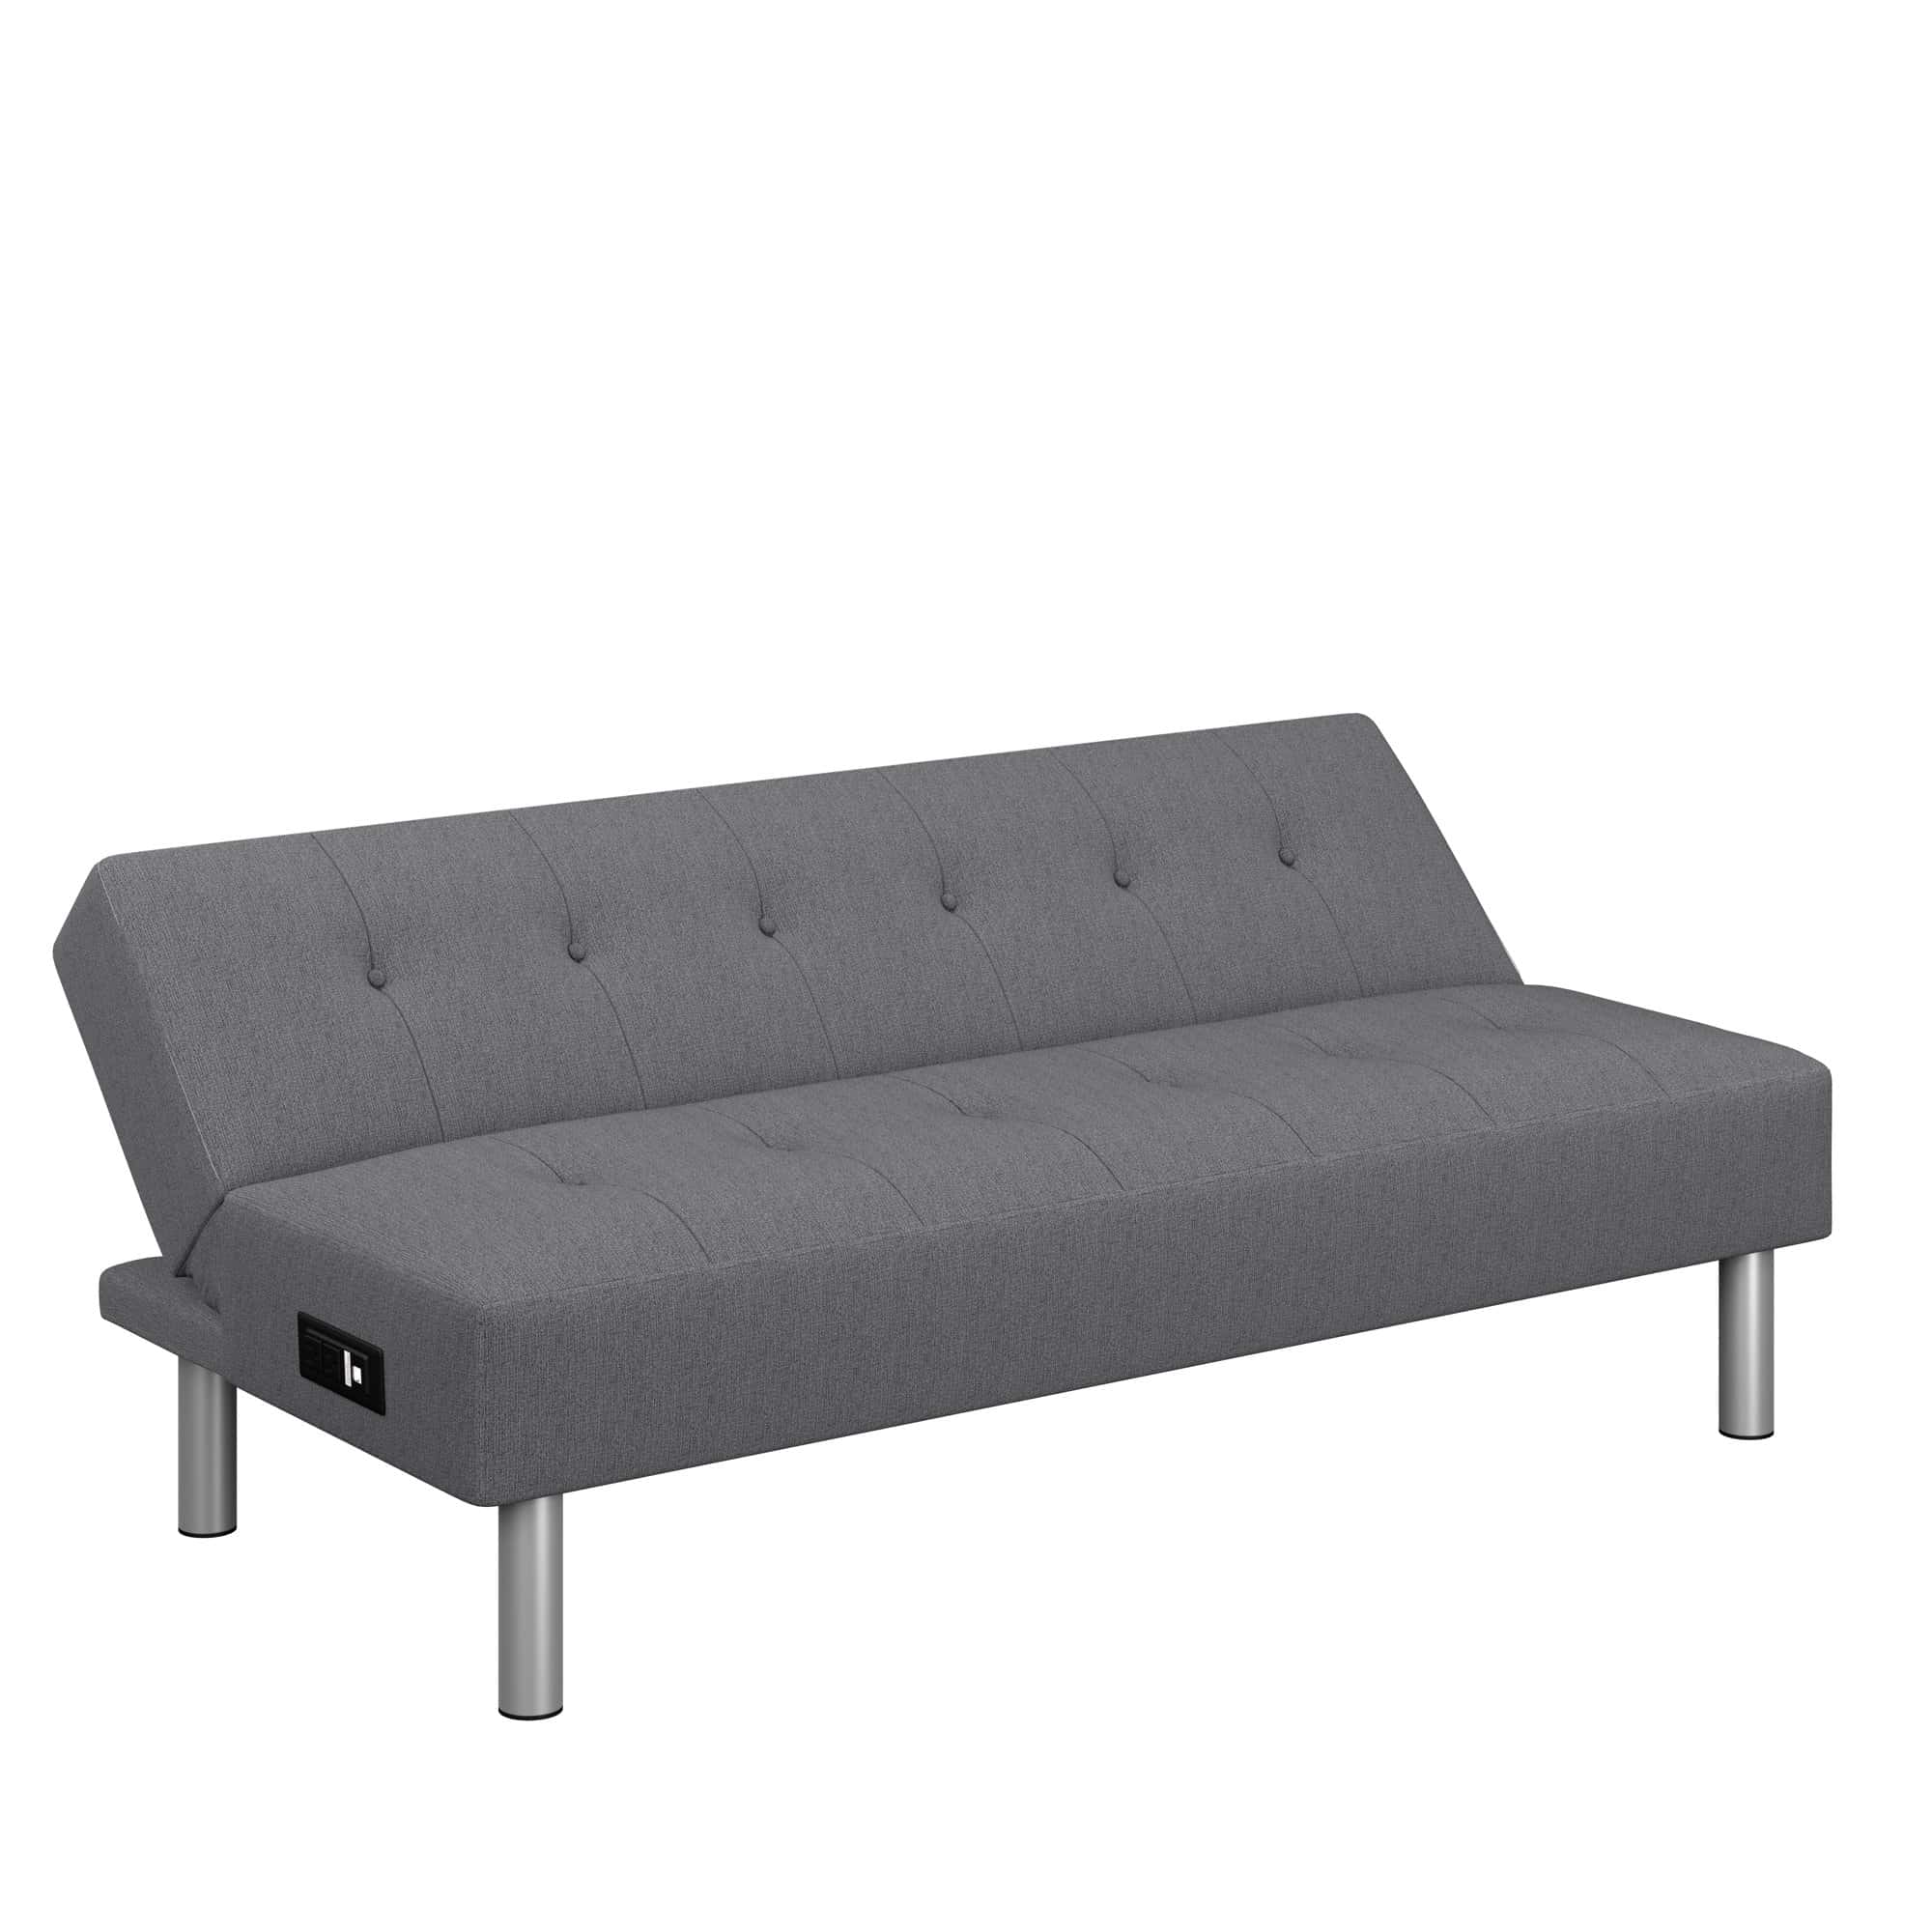 Serta® Charcoal Convertible Cobalt Sofa w/Power Strip by Lifestyle Solutions